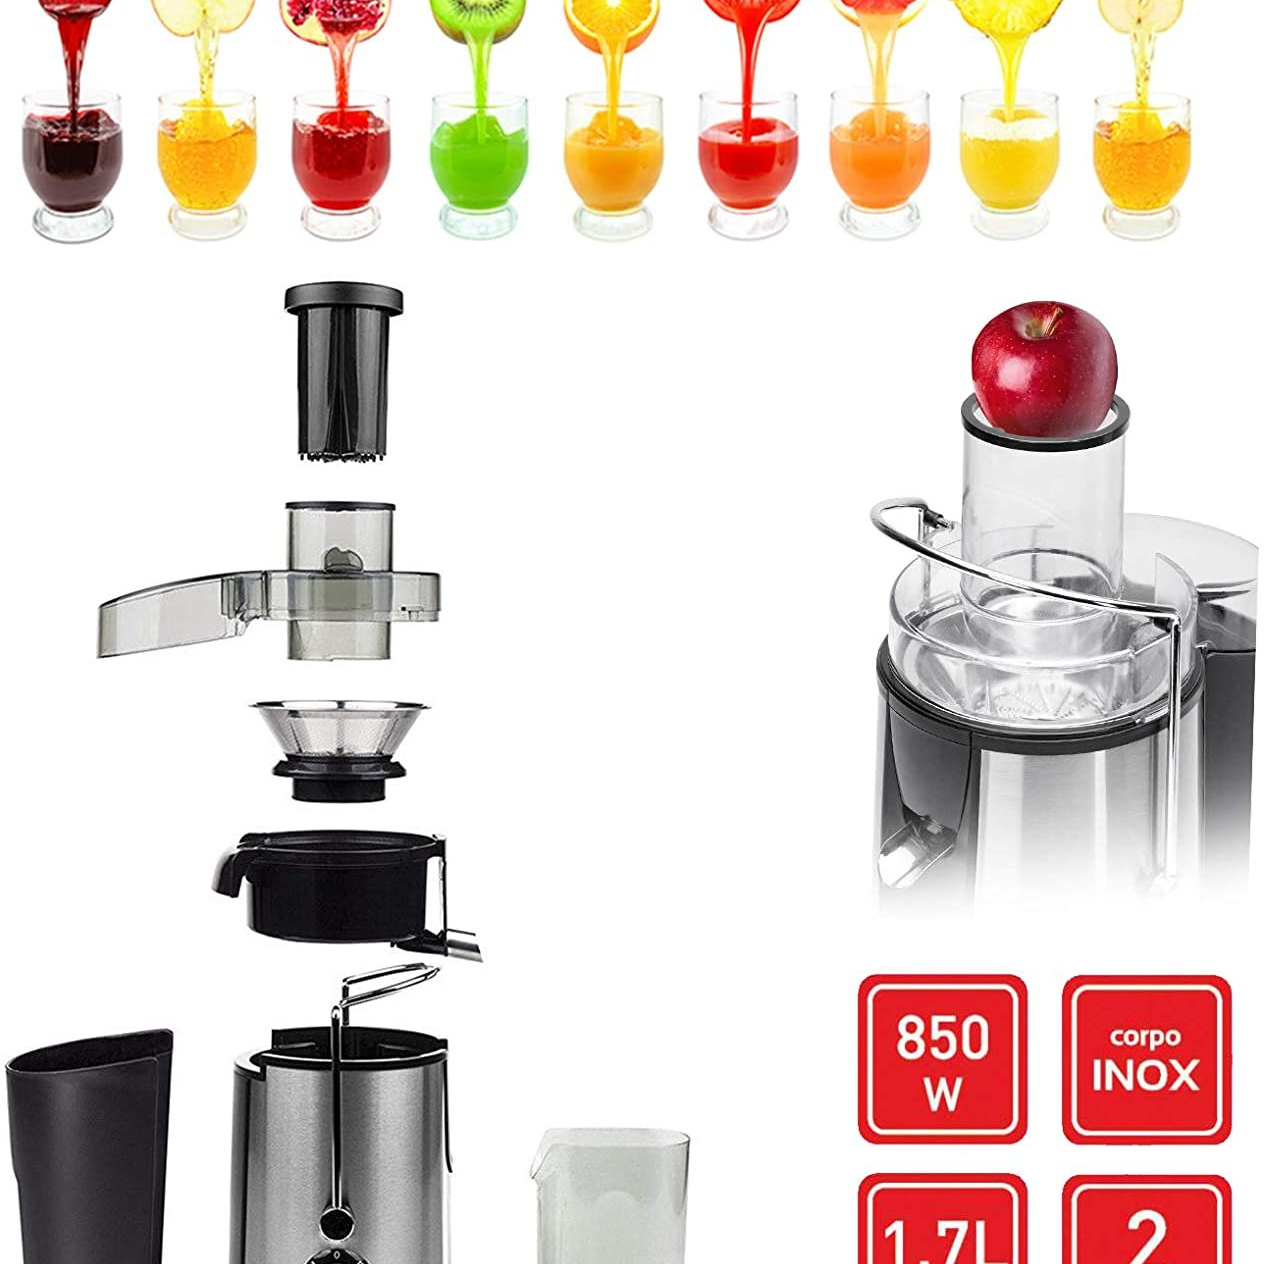 850W, centrifuge, juice extractor, 1.7LT container, fruit, vegetable, 2 speed, Hoomei, HM-6980